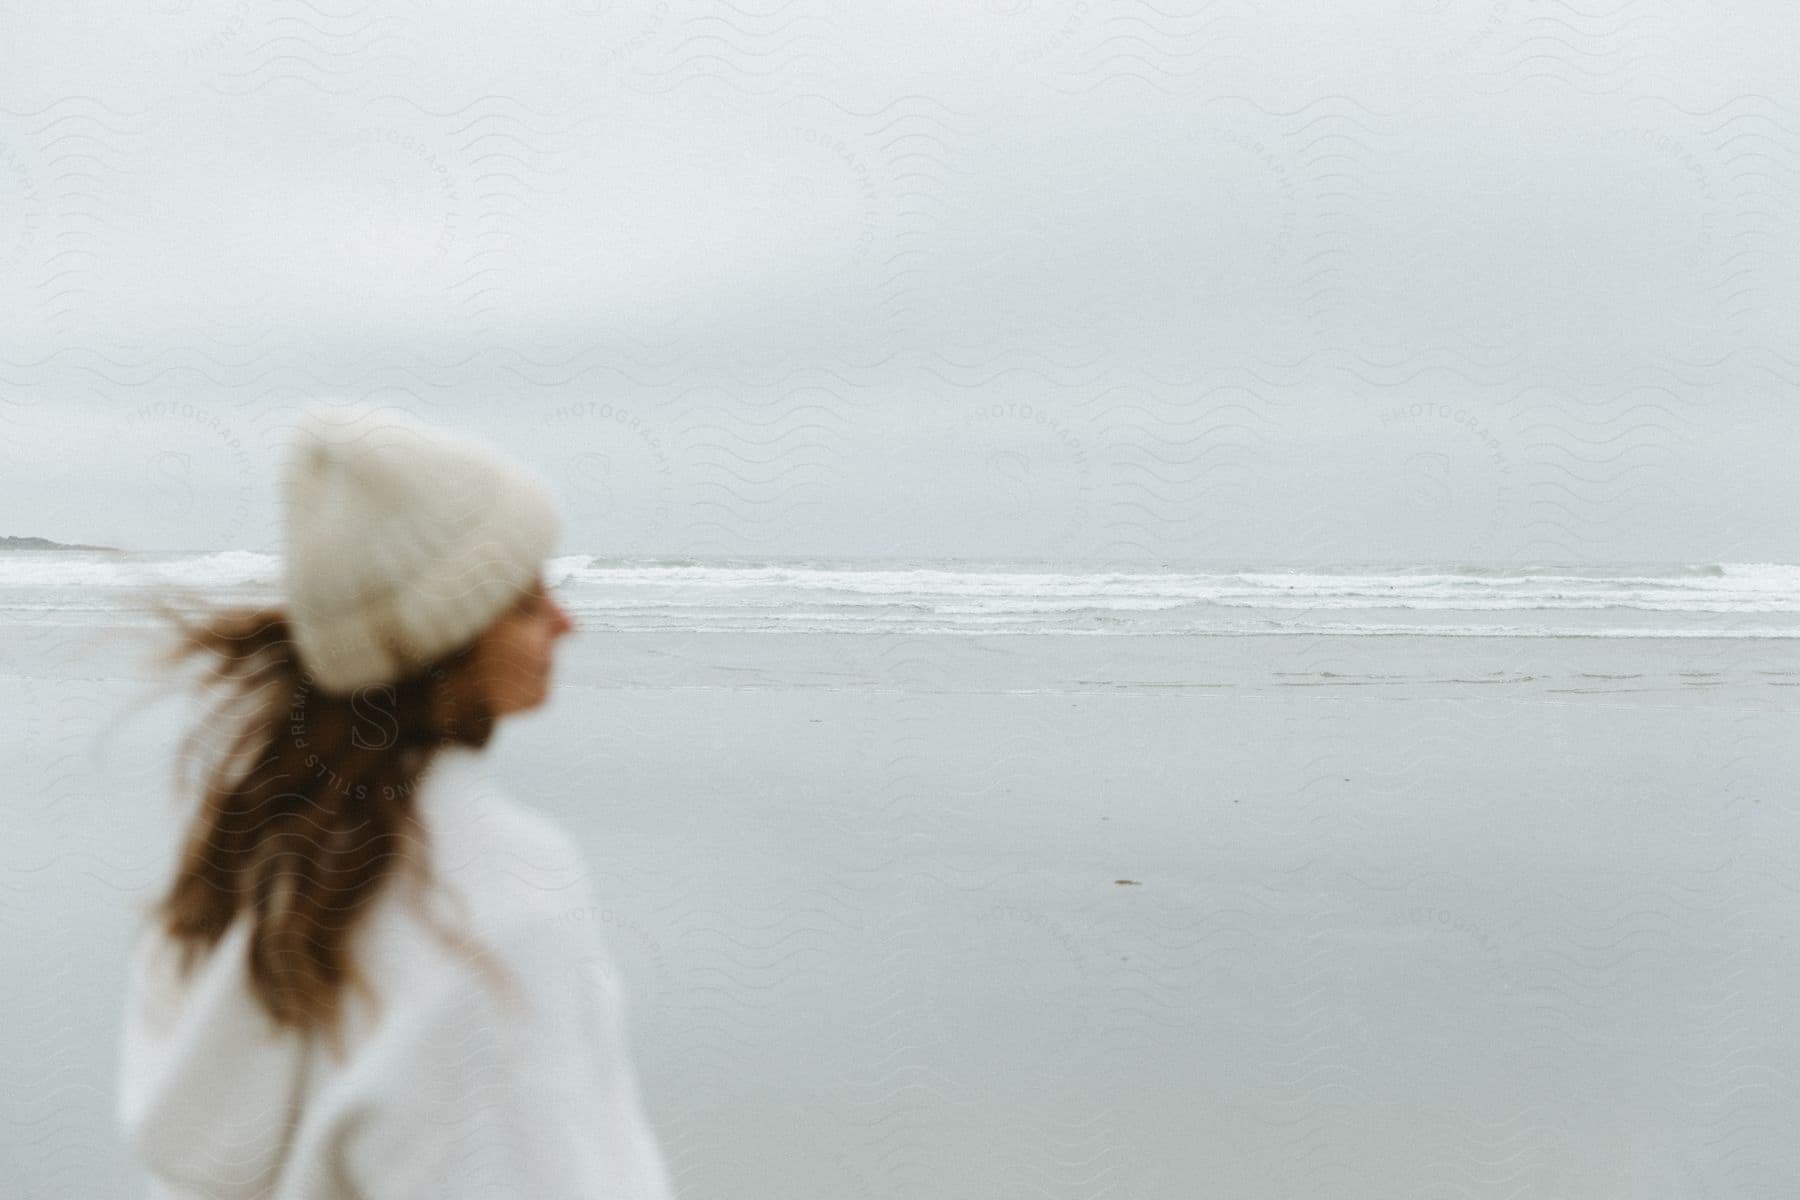 A woman wearing white warm clothes stands on a beach on an overcast day